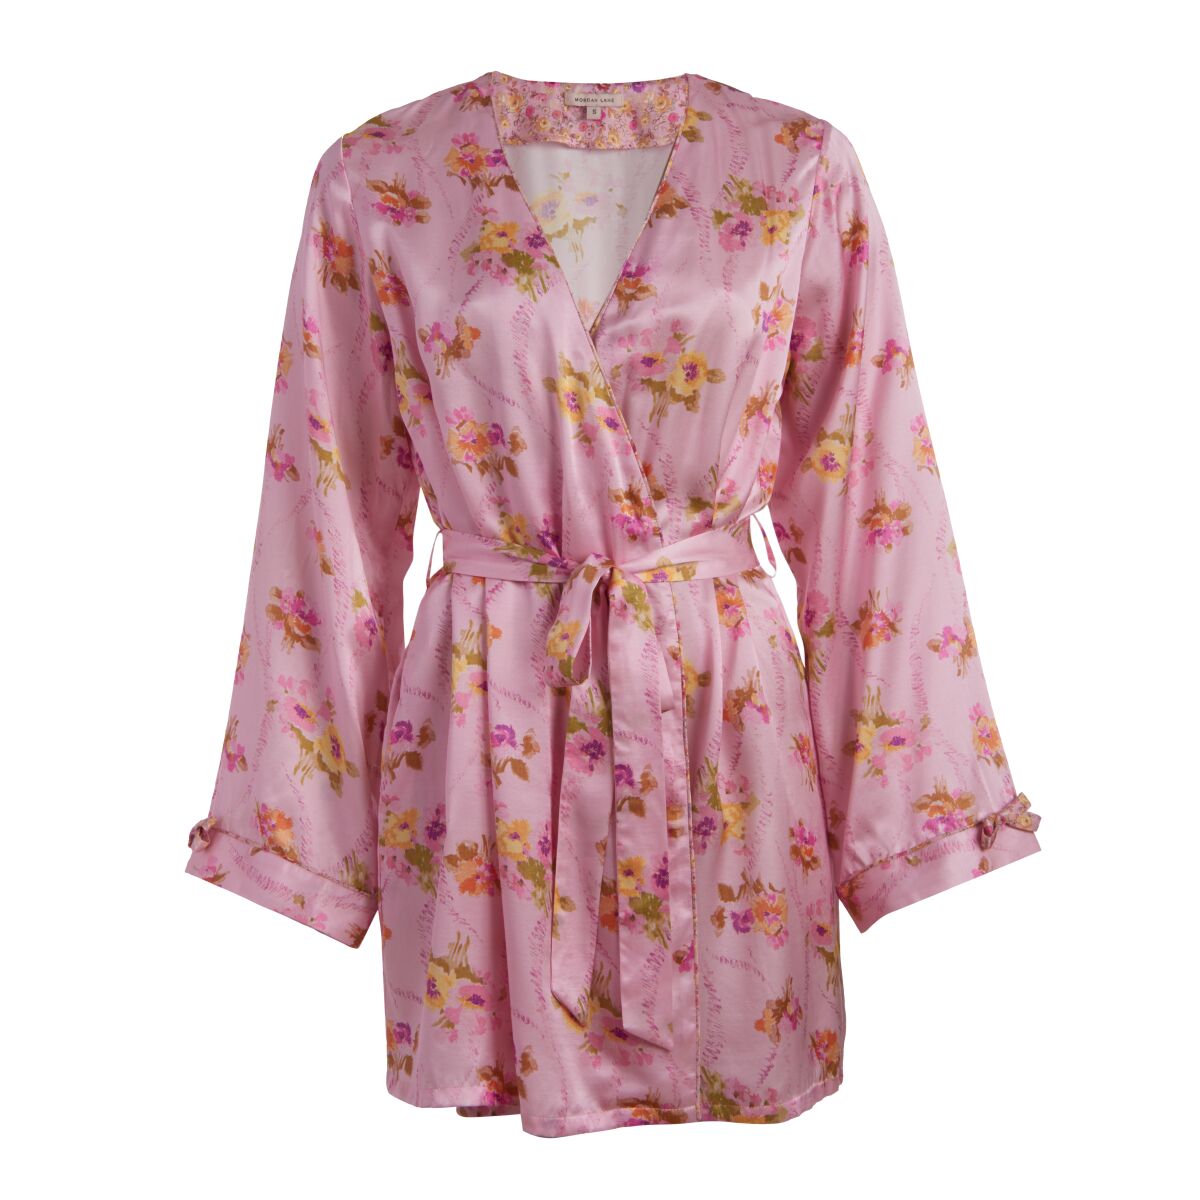 A robe in a new, limited-edition sleepwear collection from lifestyle label LoveShackFancy.